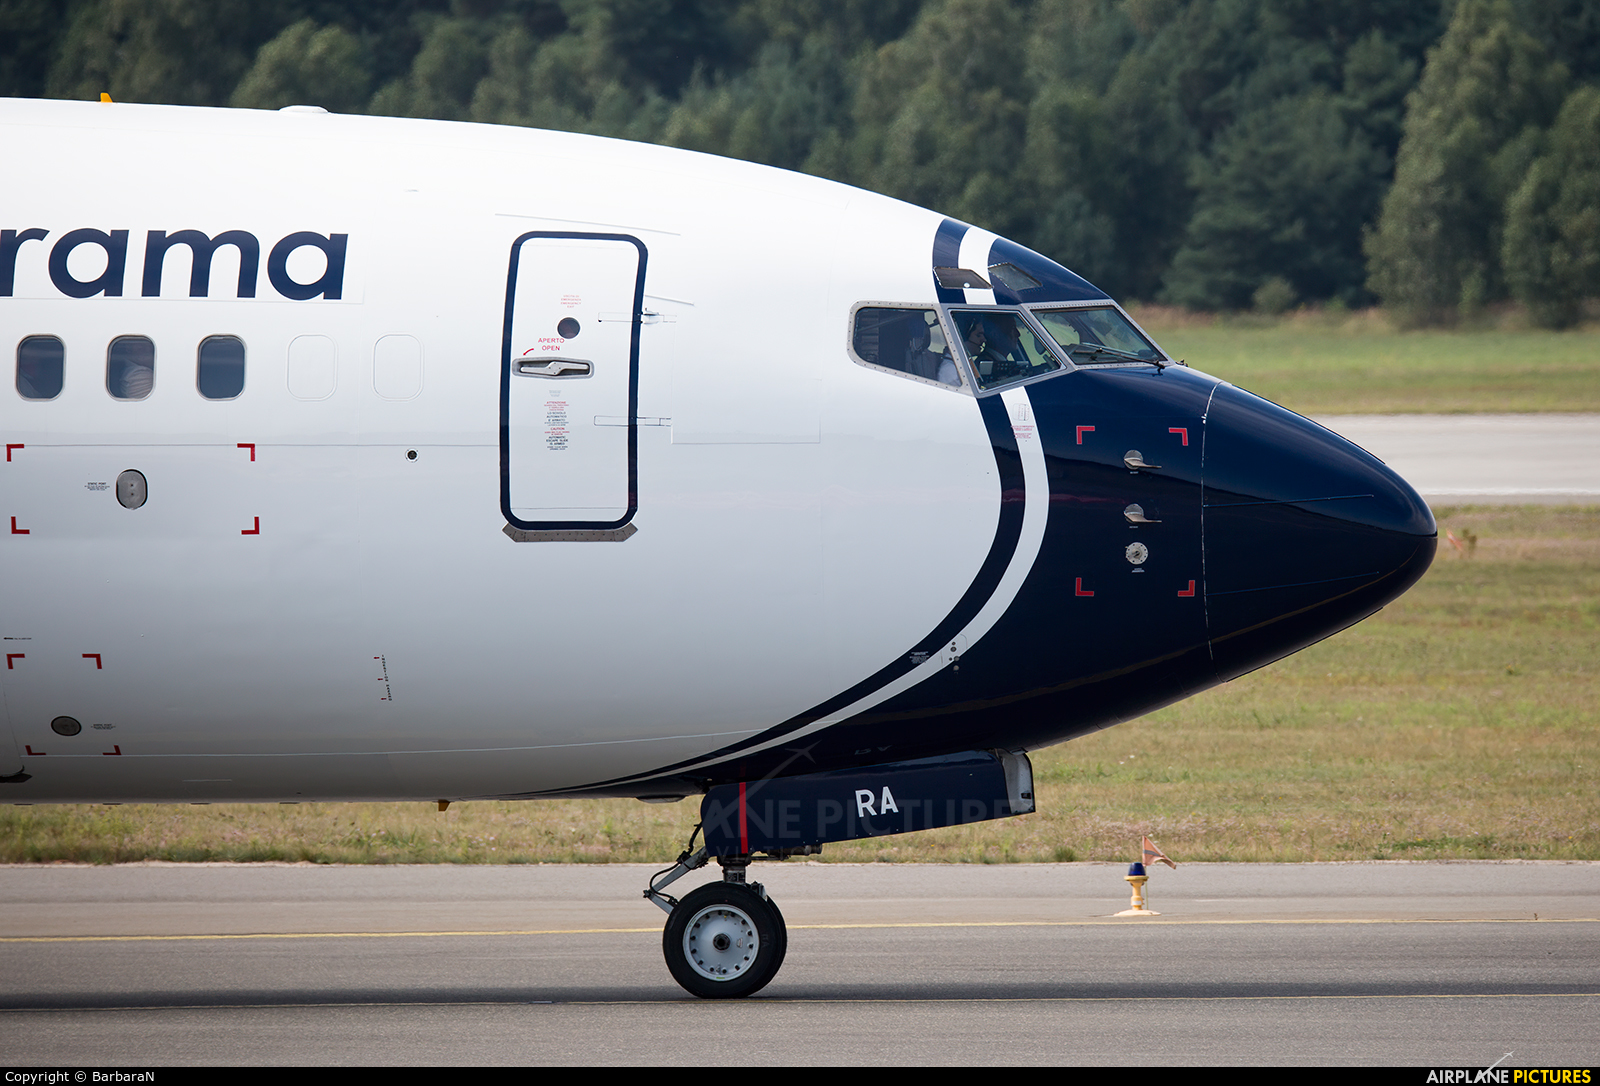 Blue Panorama Airlines 9H-FRA aircraft at Katowice - Pyrzowice